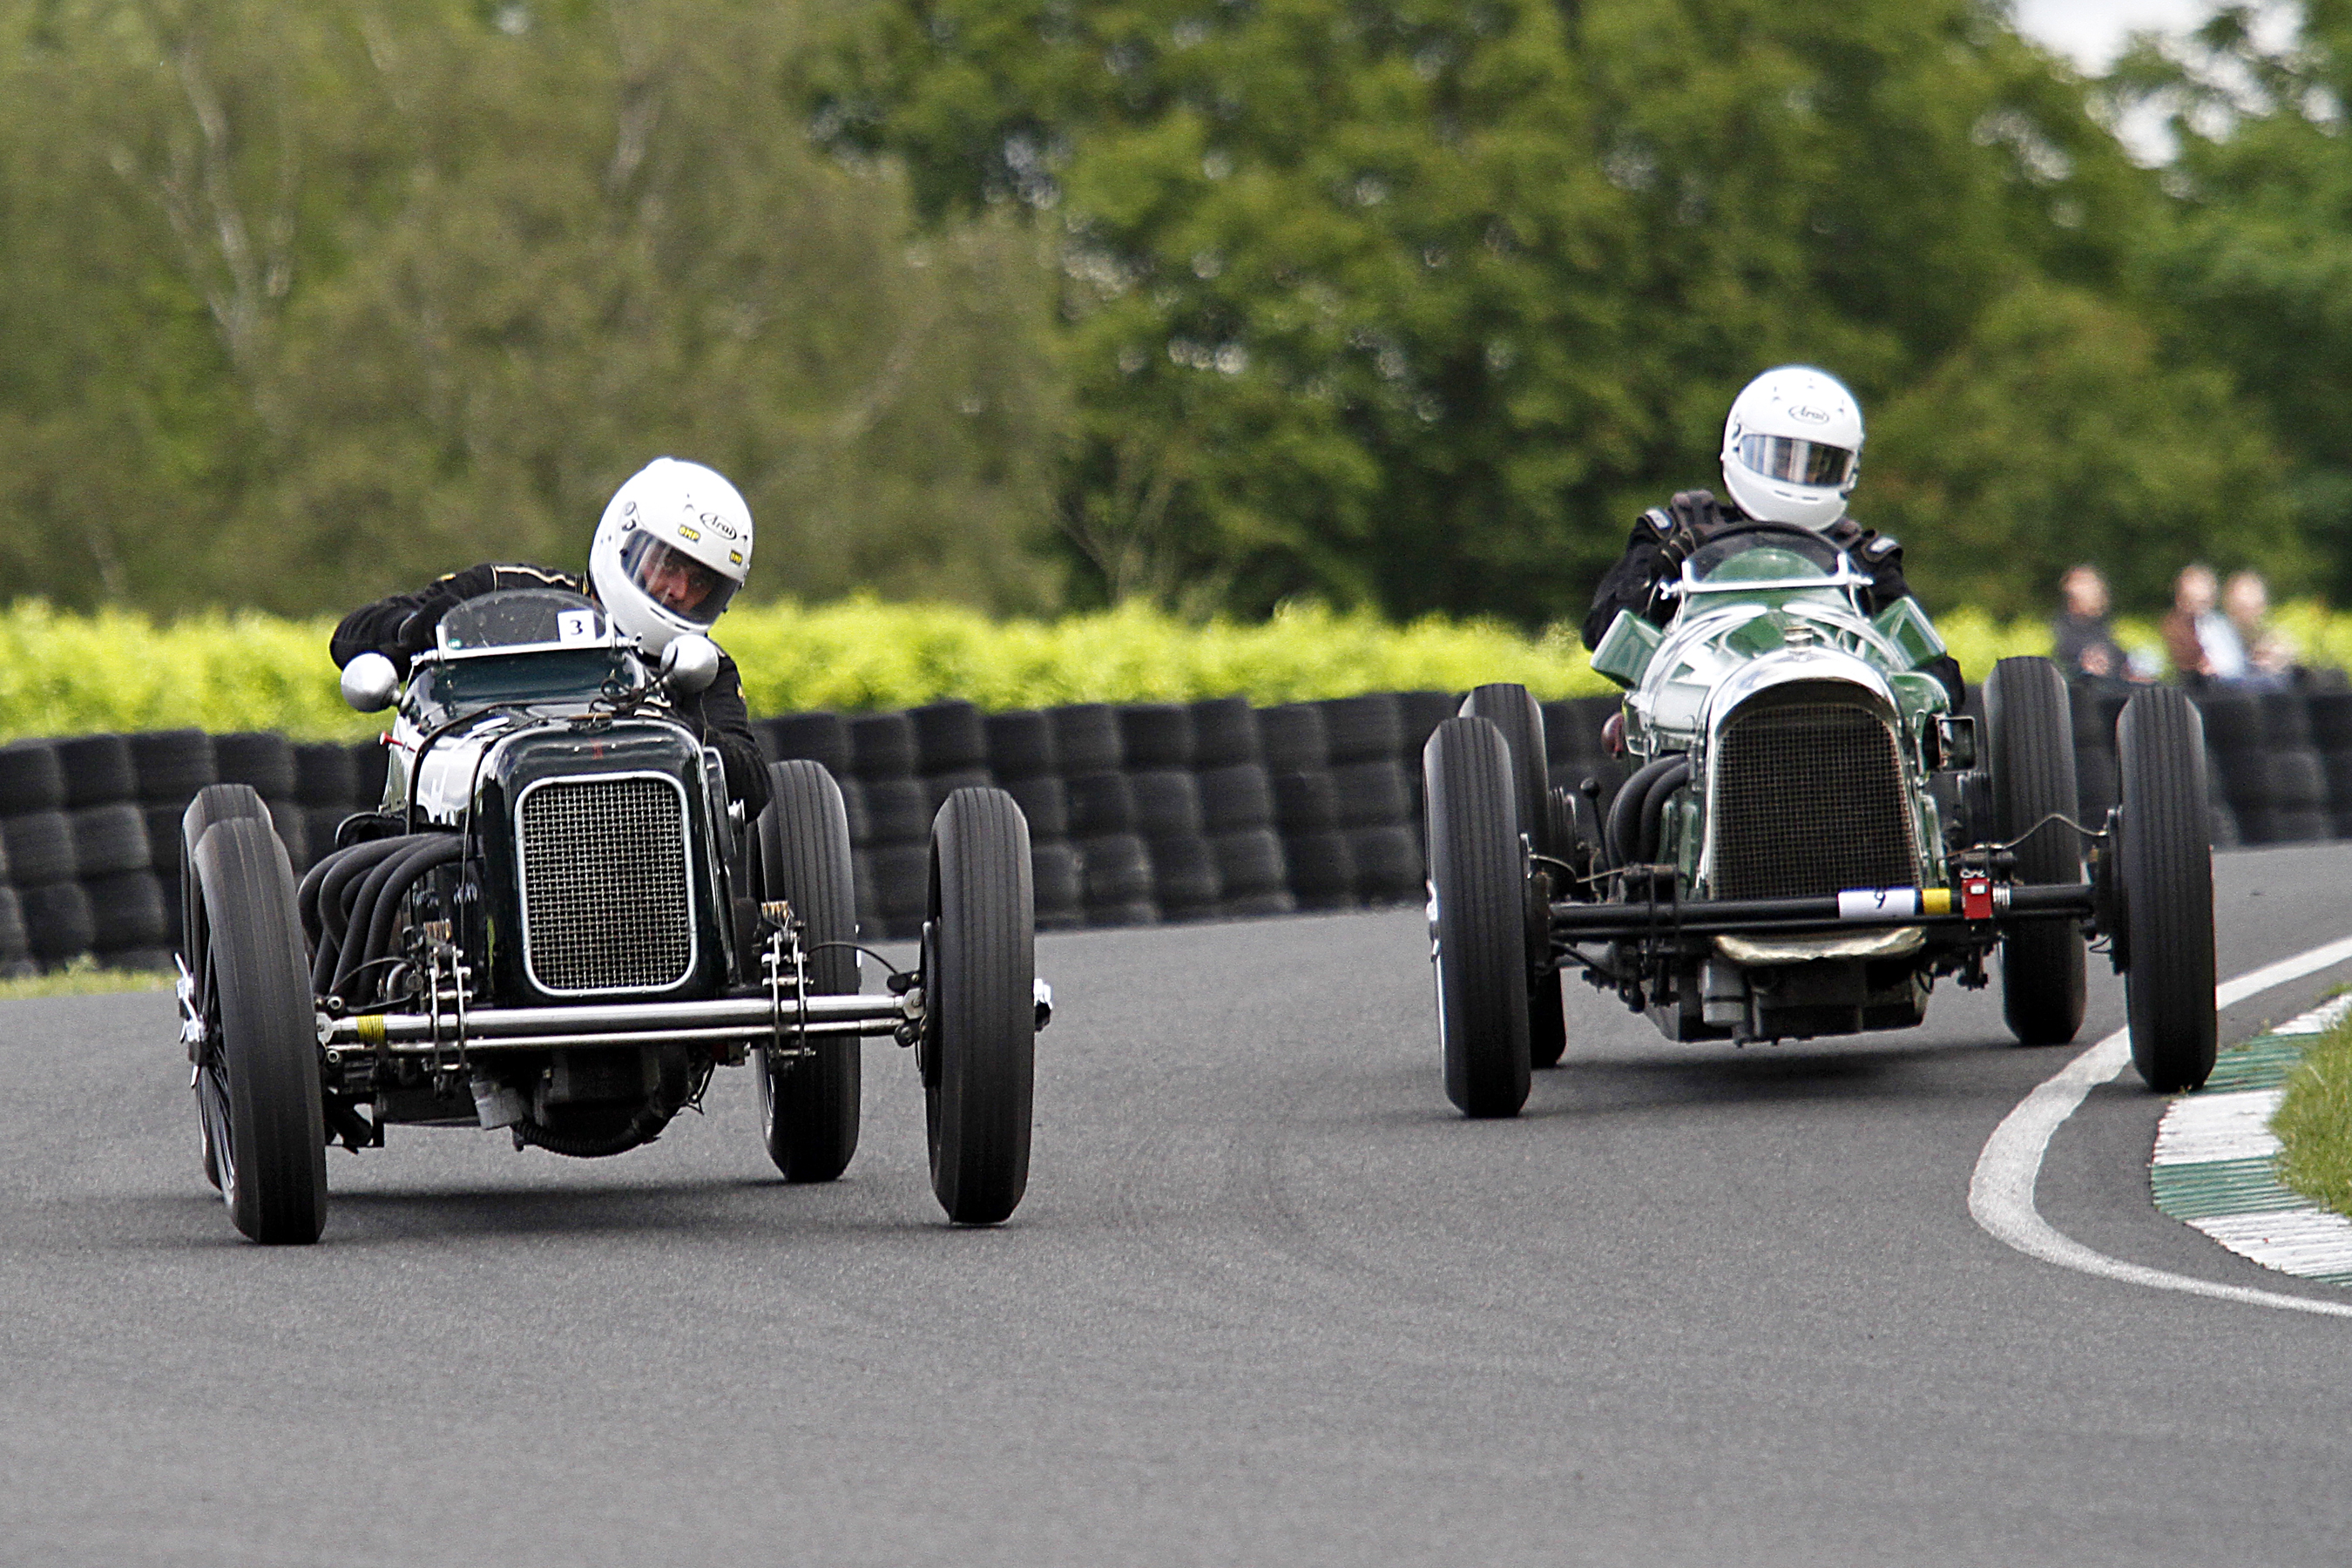 VSCC BOB GERARD MEMORIAL RACE MEETING AT MALLORY PARK UNAFFECTED BY LOCAL COUNCIL DECISIONS cover